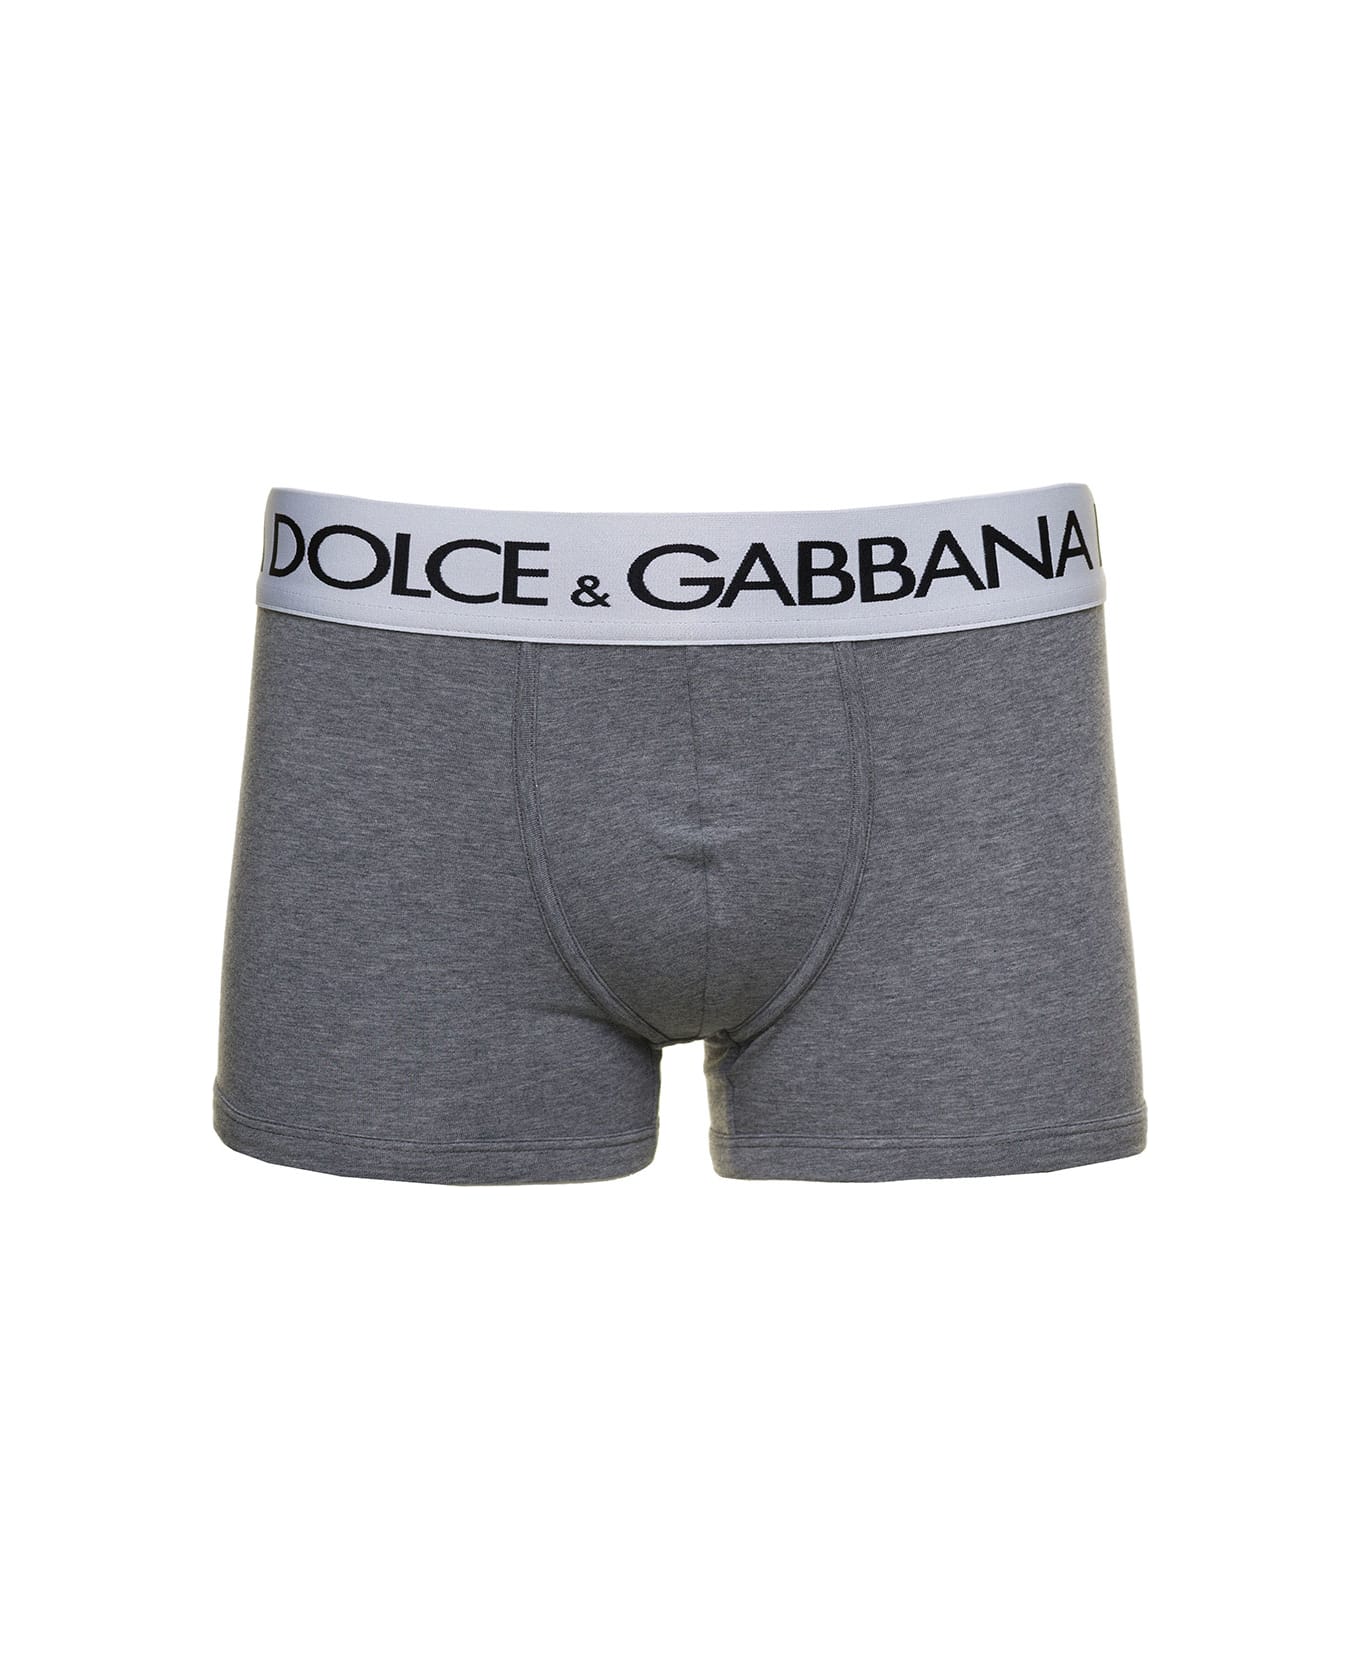 Dolce & Gabbana Grey Boxer Briefs With Branded Waistband In Stretch Cotton Man - Grey ショーツ